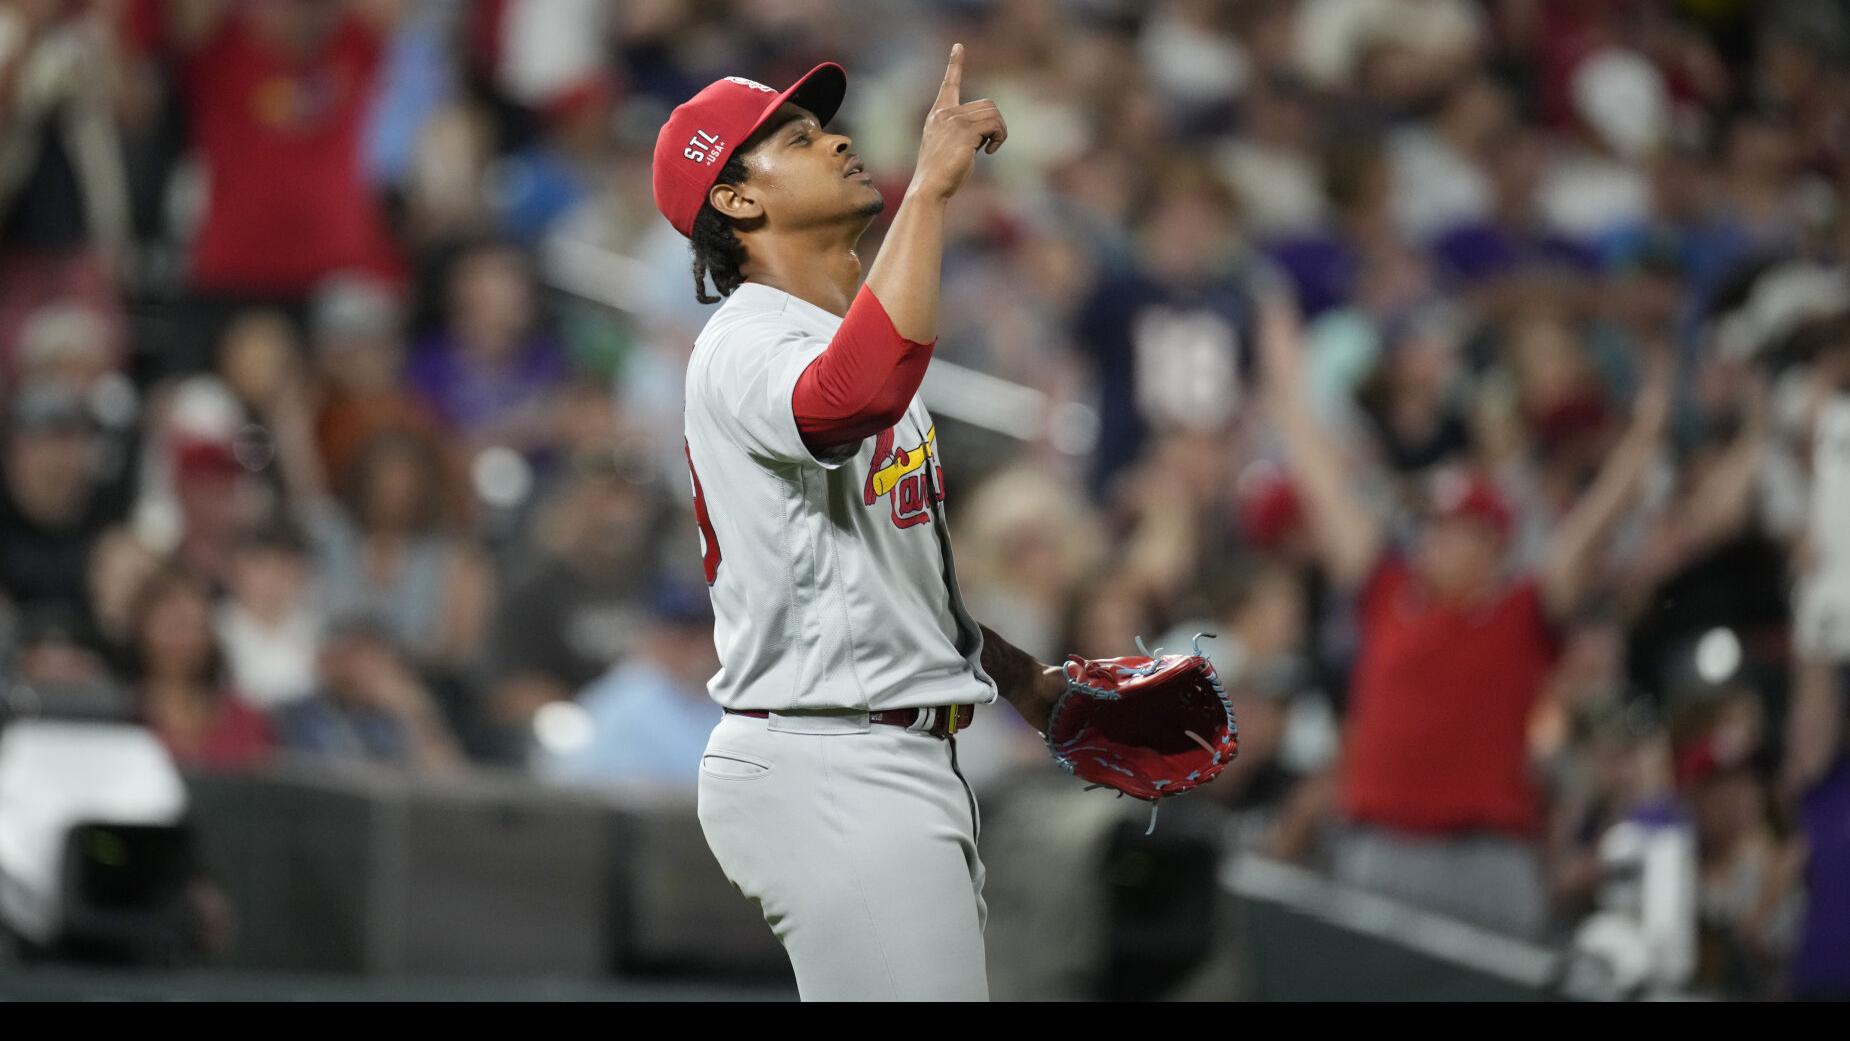 Cardinals closer Alex Reyes named to 1st All-Star Game